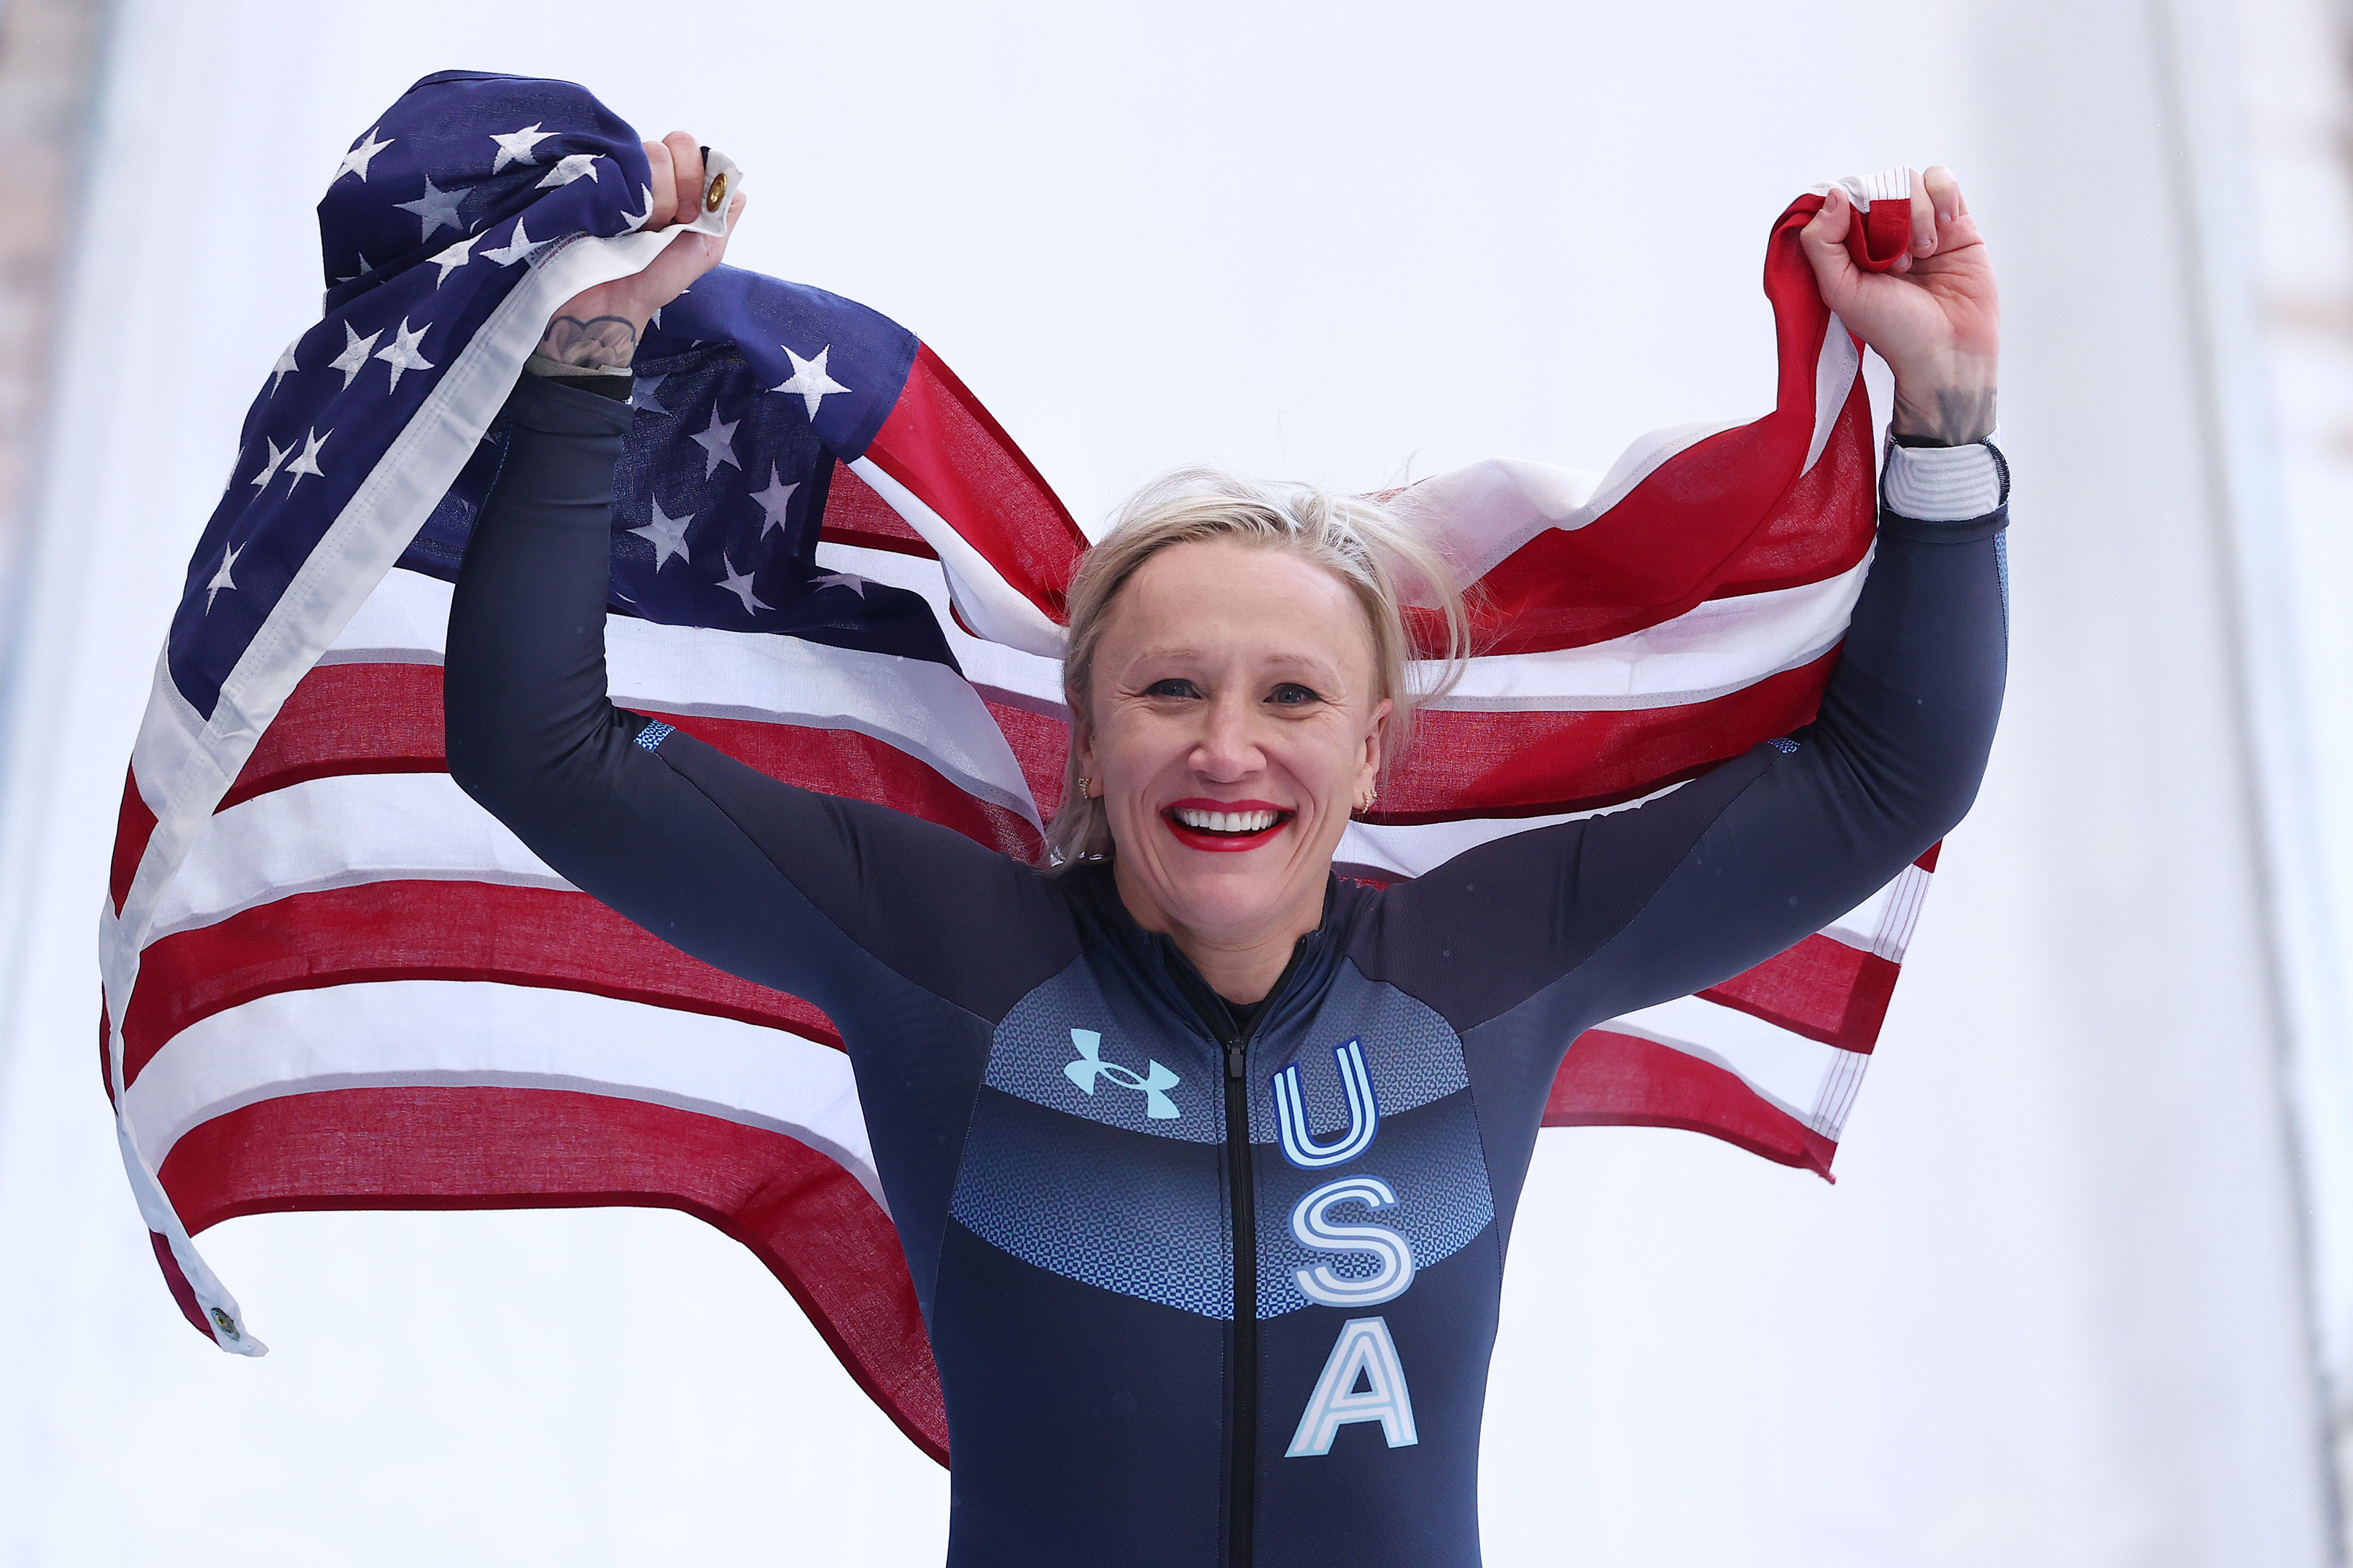 After monobob gold, USA's Kaillie Humphries pushes for equality across